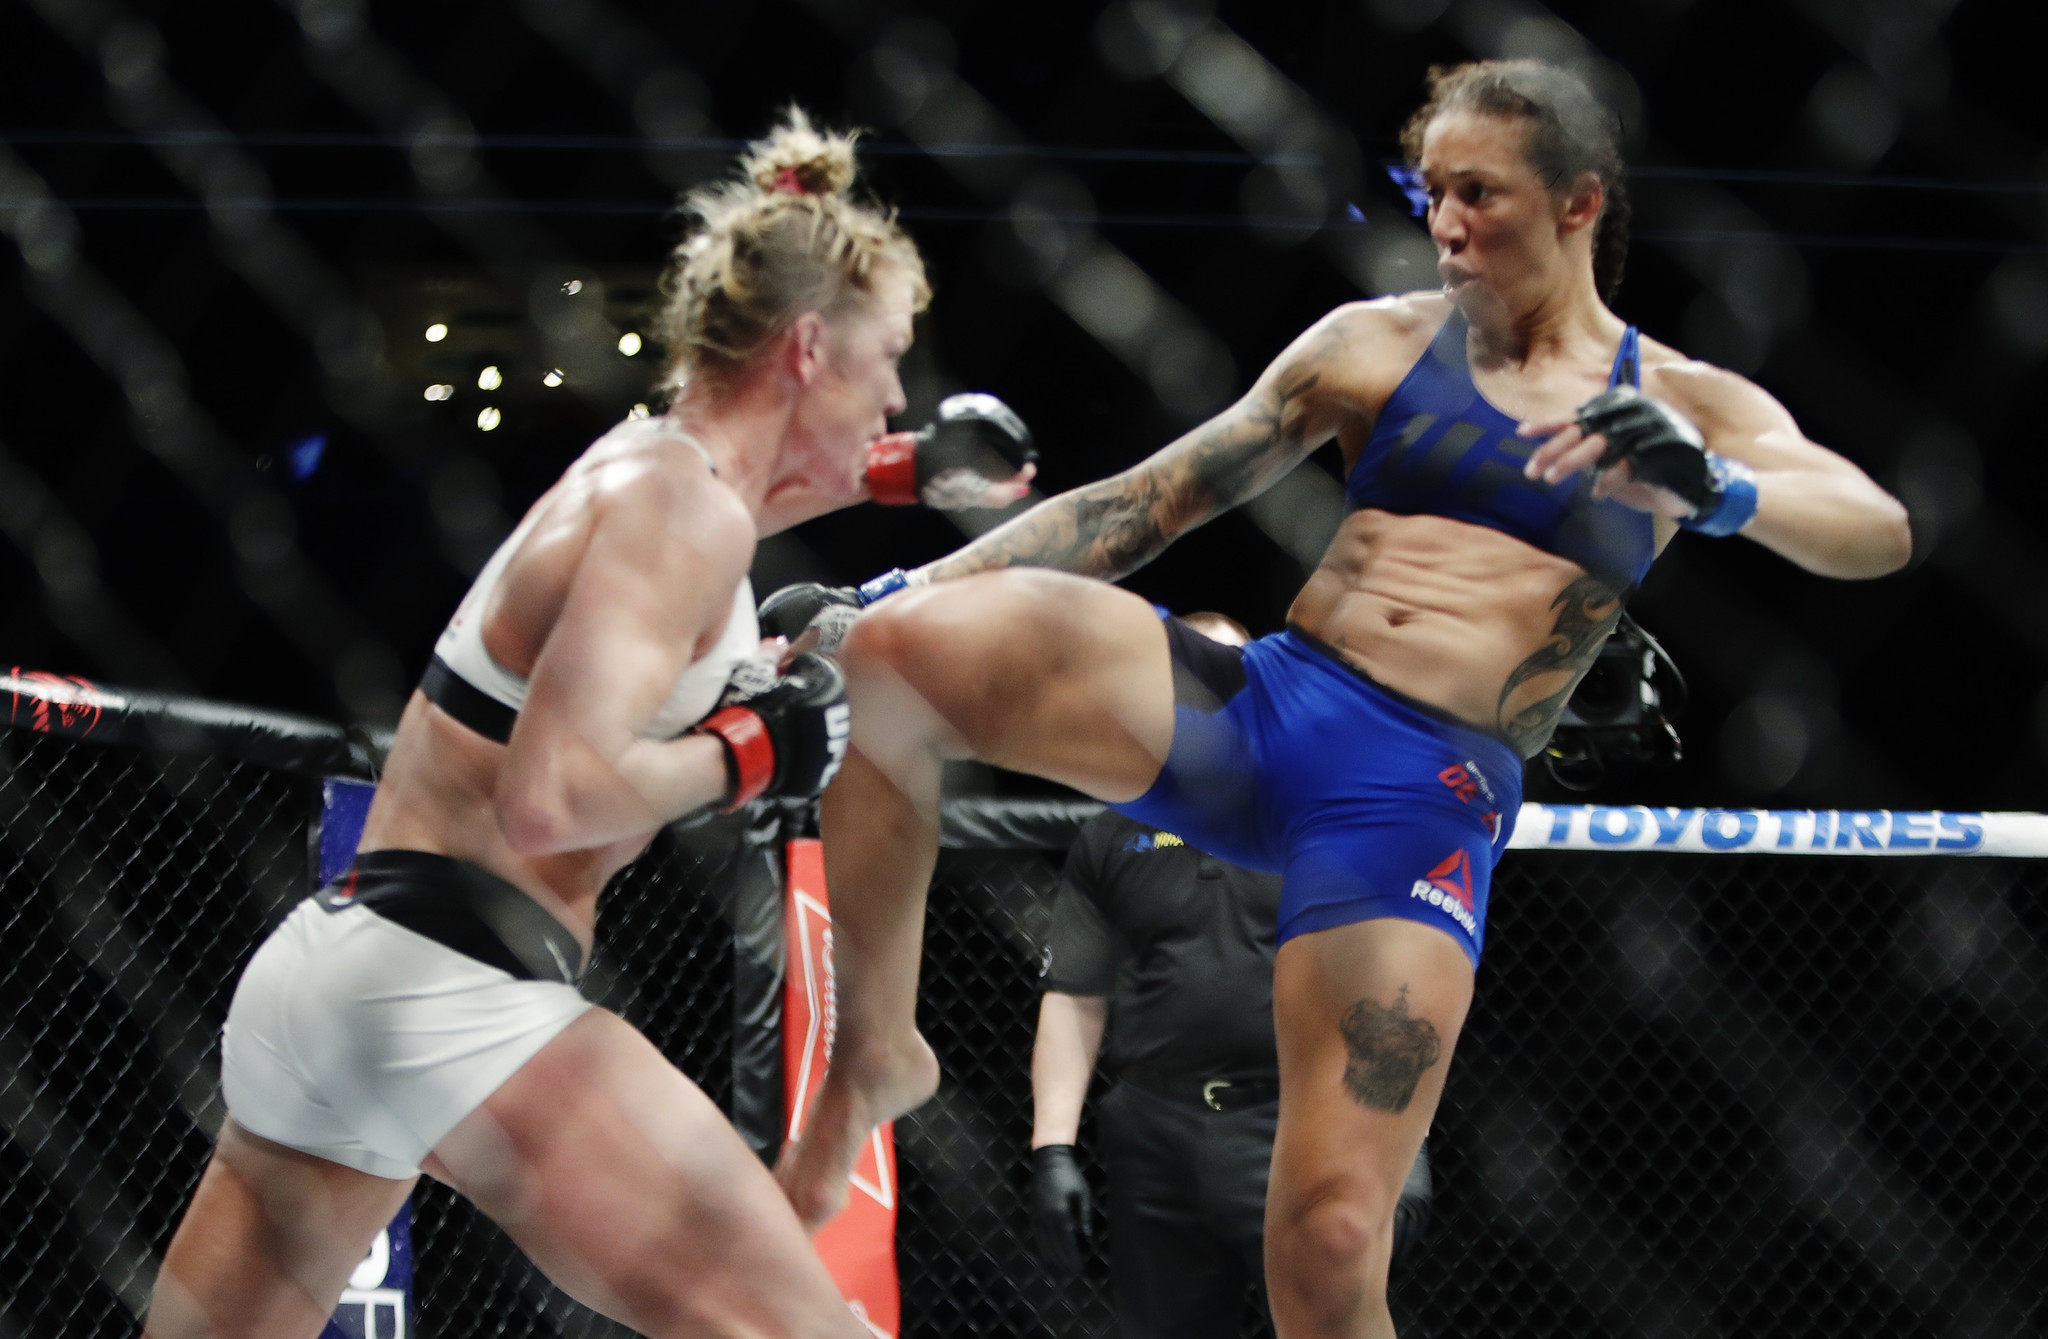 Holly Holm at a crossroads following her third consecutive loss, at UFC 208 - LA Times2048 x 1339